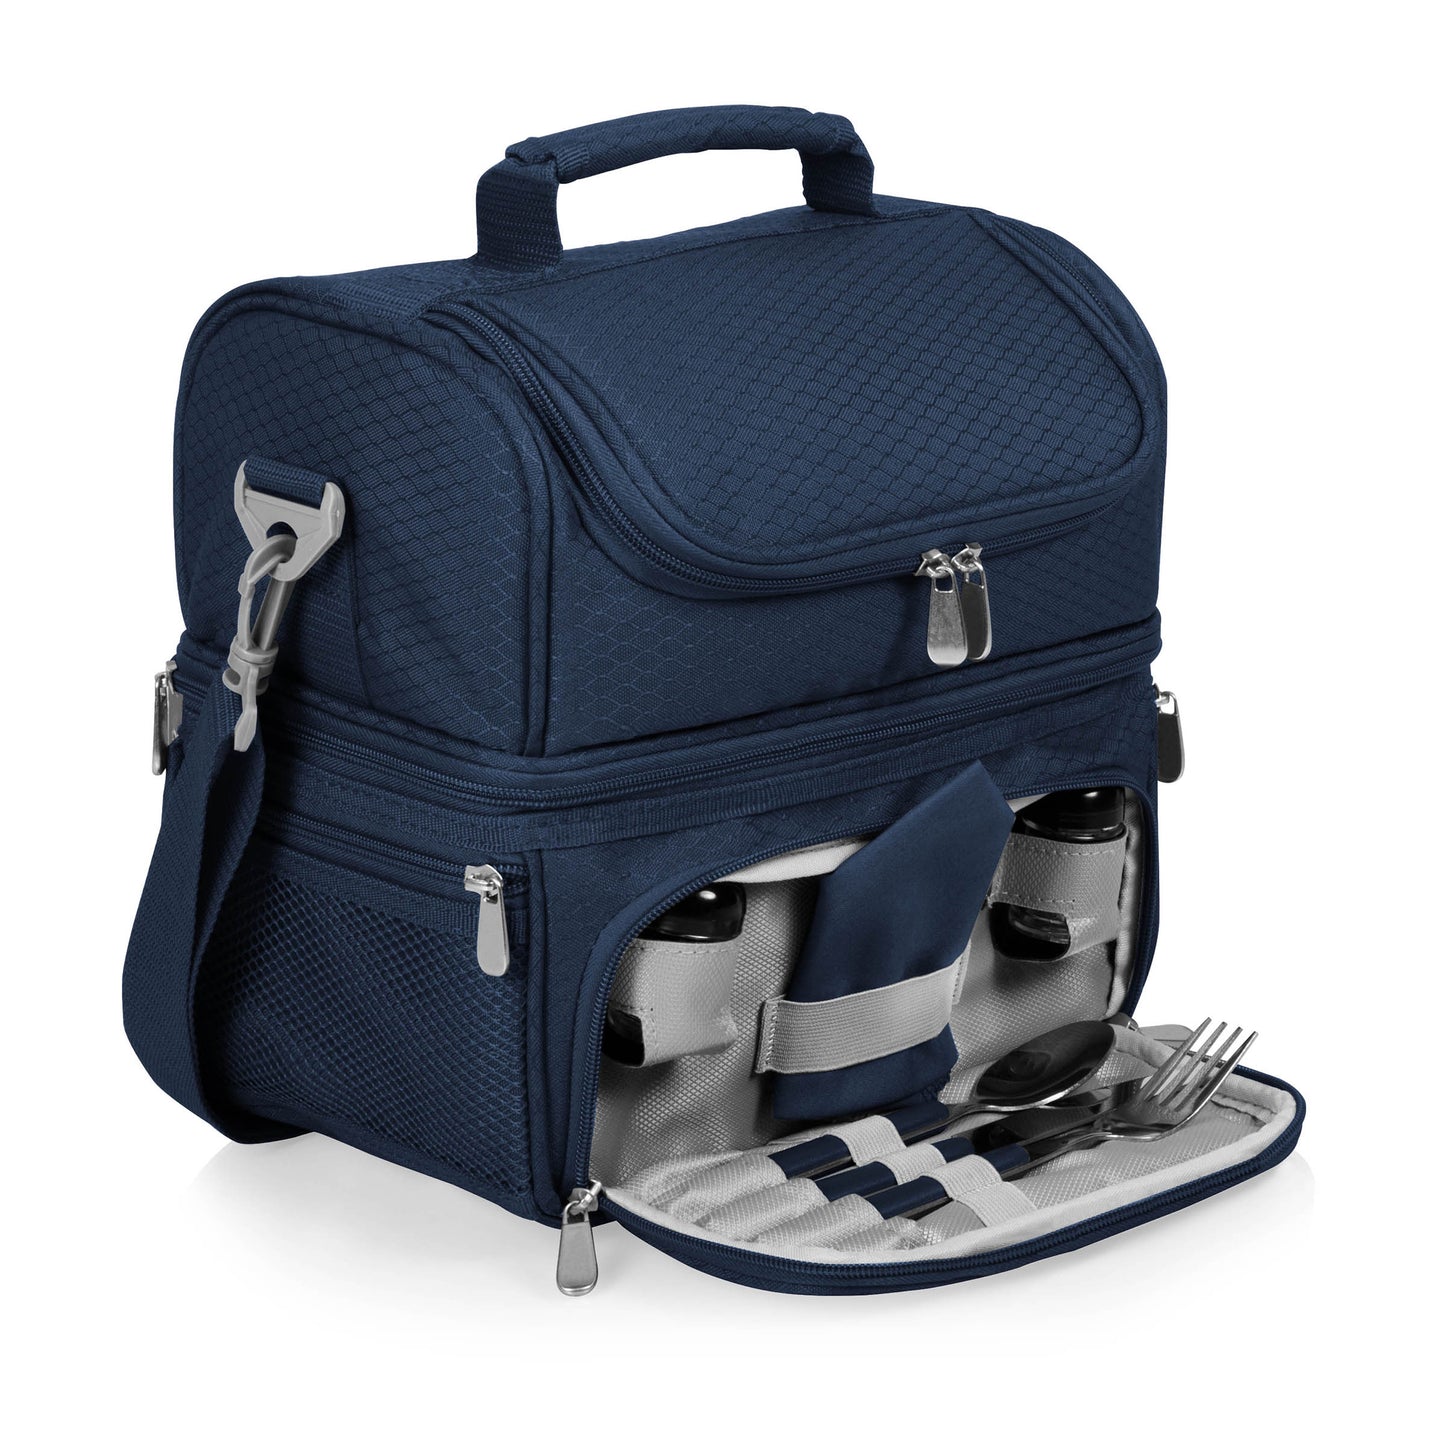 Seattle Seahawks - Pranzo Lunch Cooler Bag